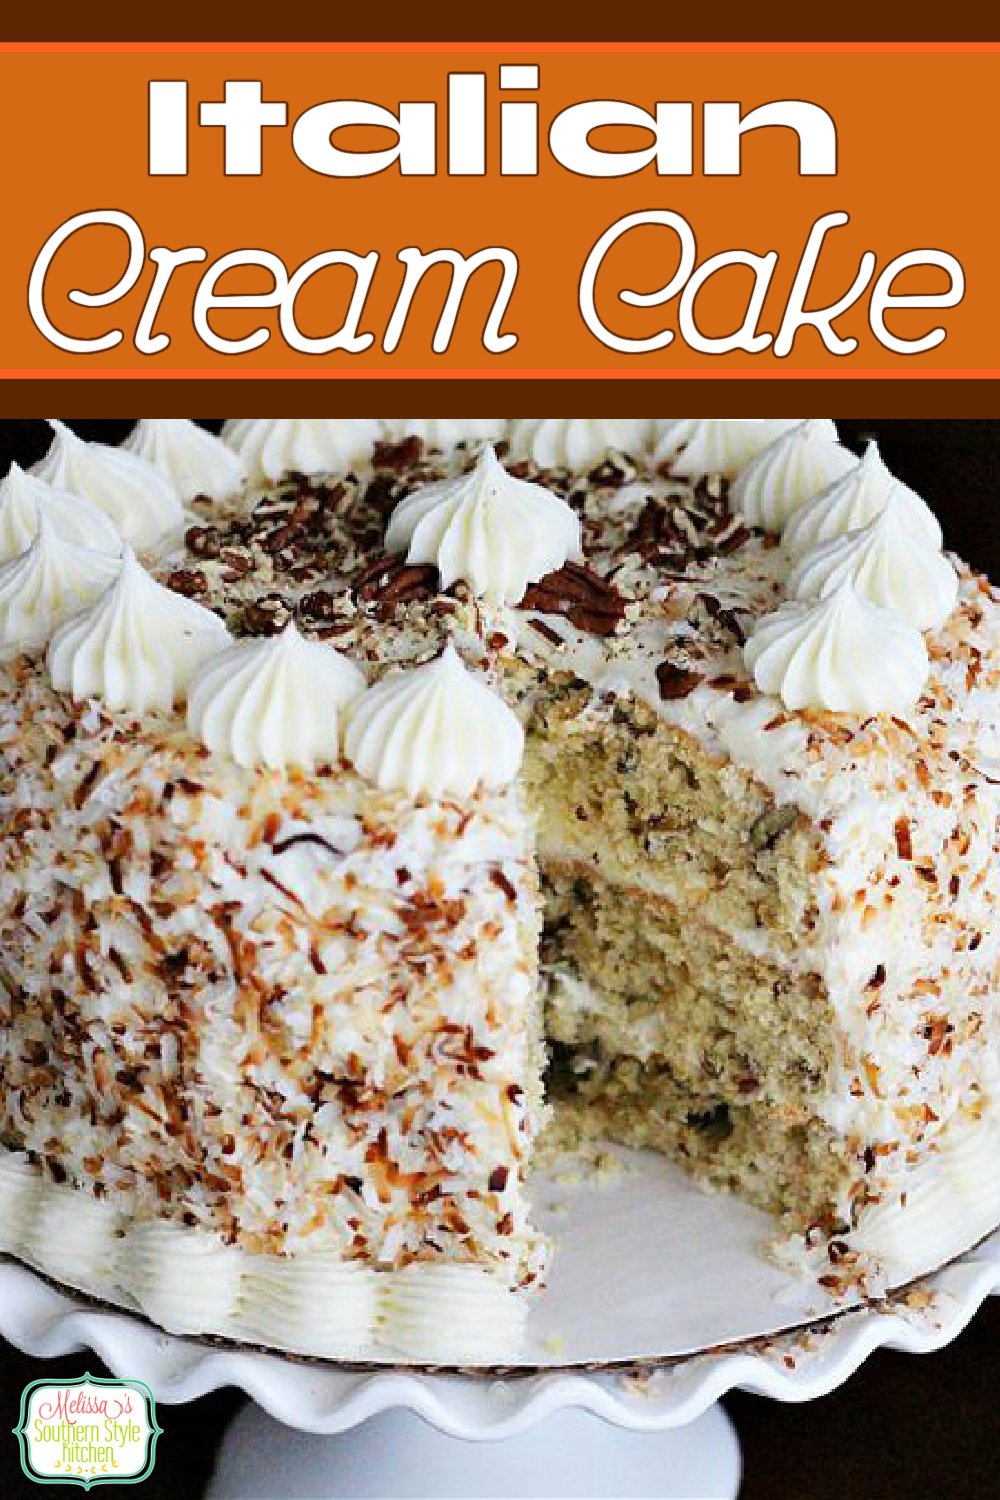 Turn any occasion into something special with this amazing Italian Cream Cake #italiancreamcake #cake #layercake #desserts #dessertfoodrecipes #sweets #southernfood #southernrecipes #easter #christmas #thanskgiving #holidayrecipes via @melissasssk